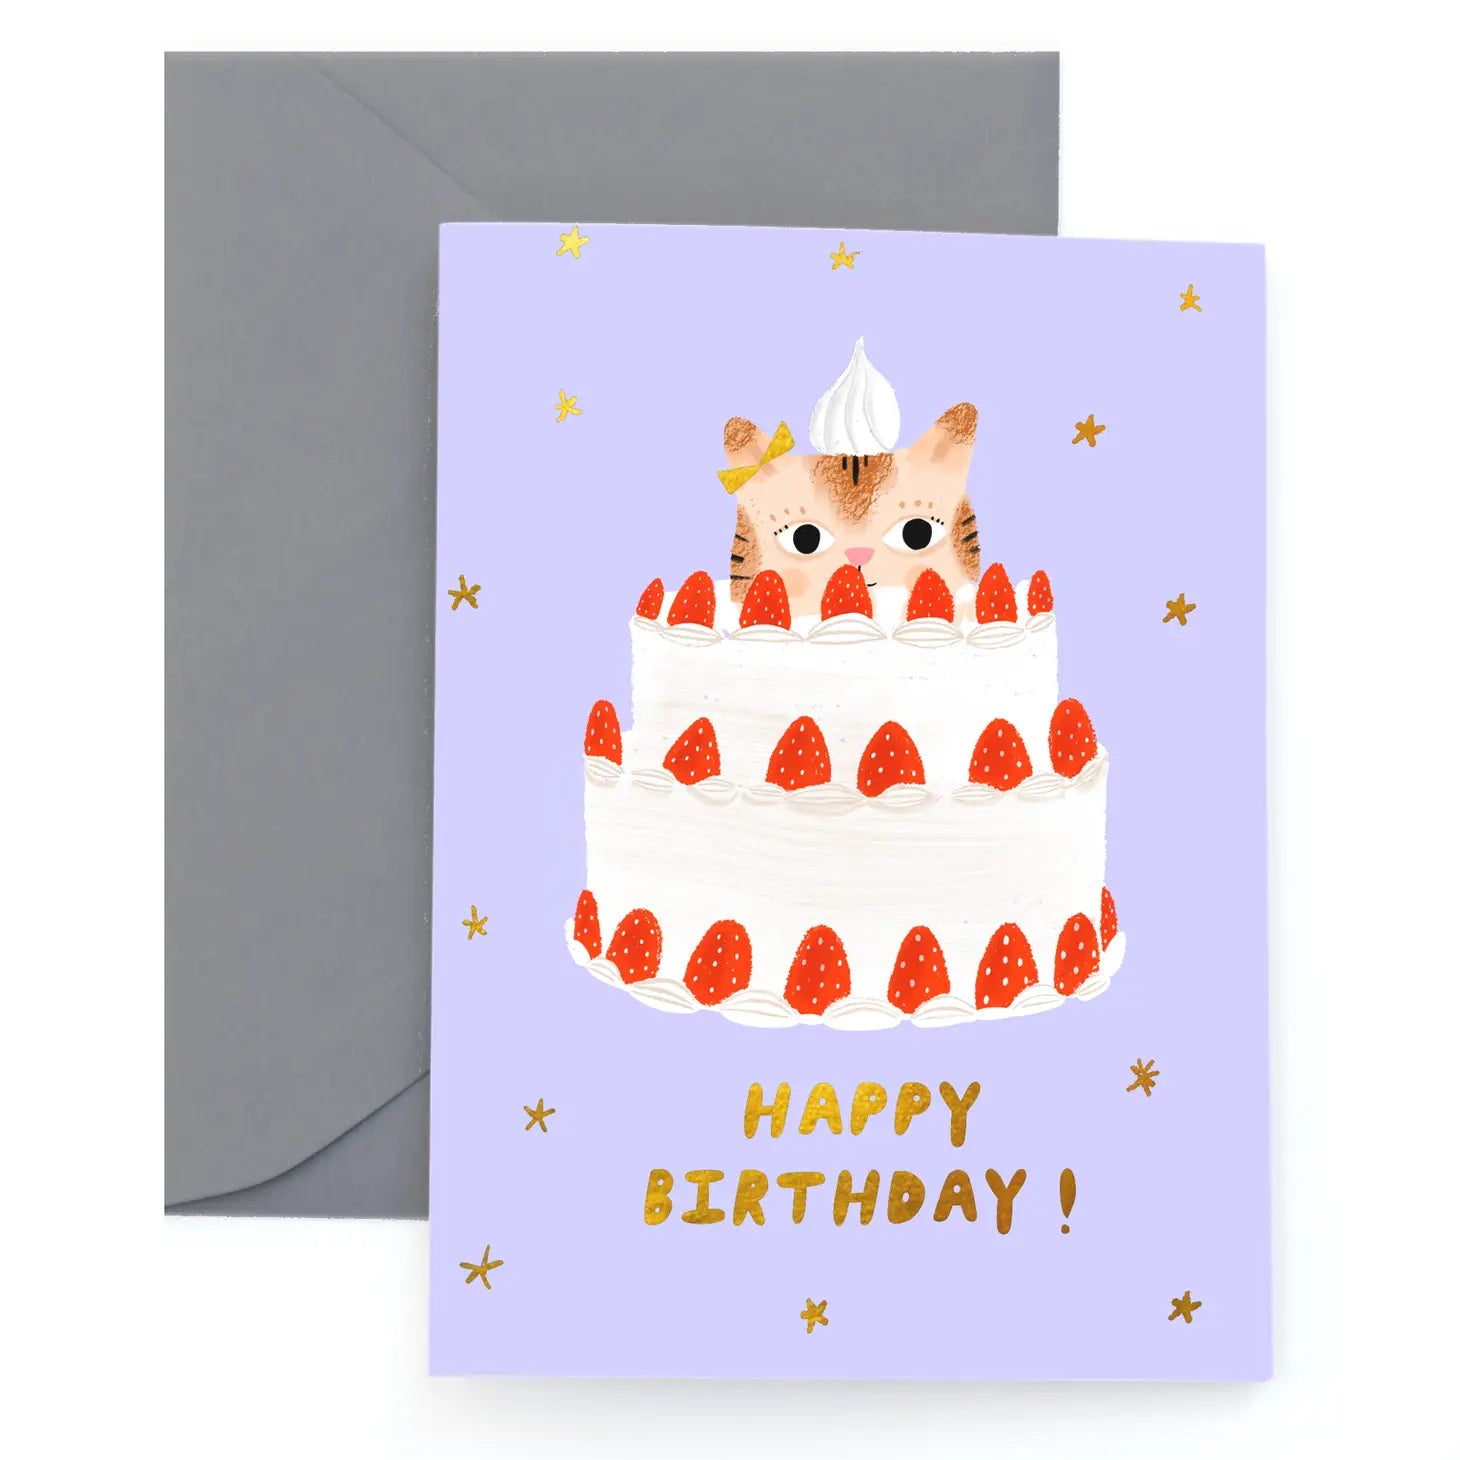 Blue greeting card with gold stars all over it. Main image is a tiered white cake. The bottom two tiers are white with strawberries and the top tier is the head of a cat with a dollop of cream on it's head. Bottom reads "Happy Birthday"